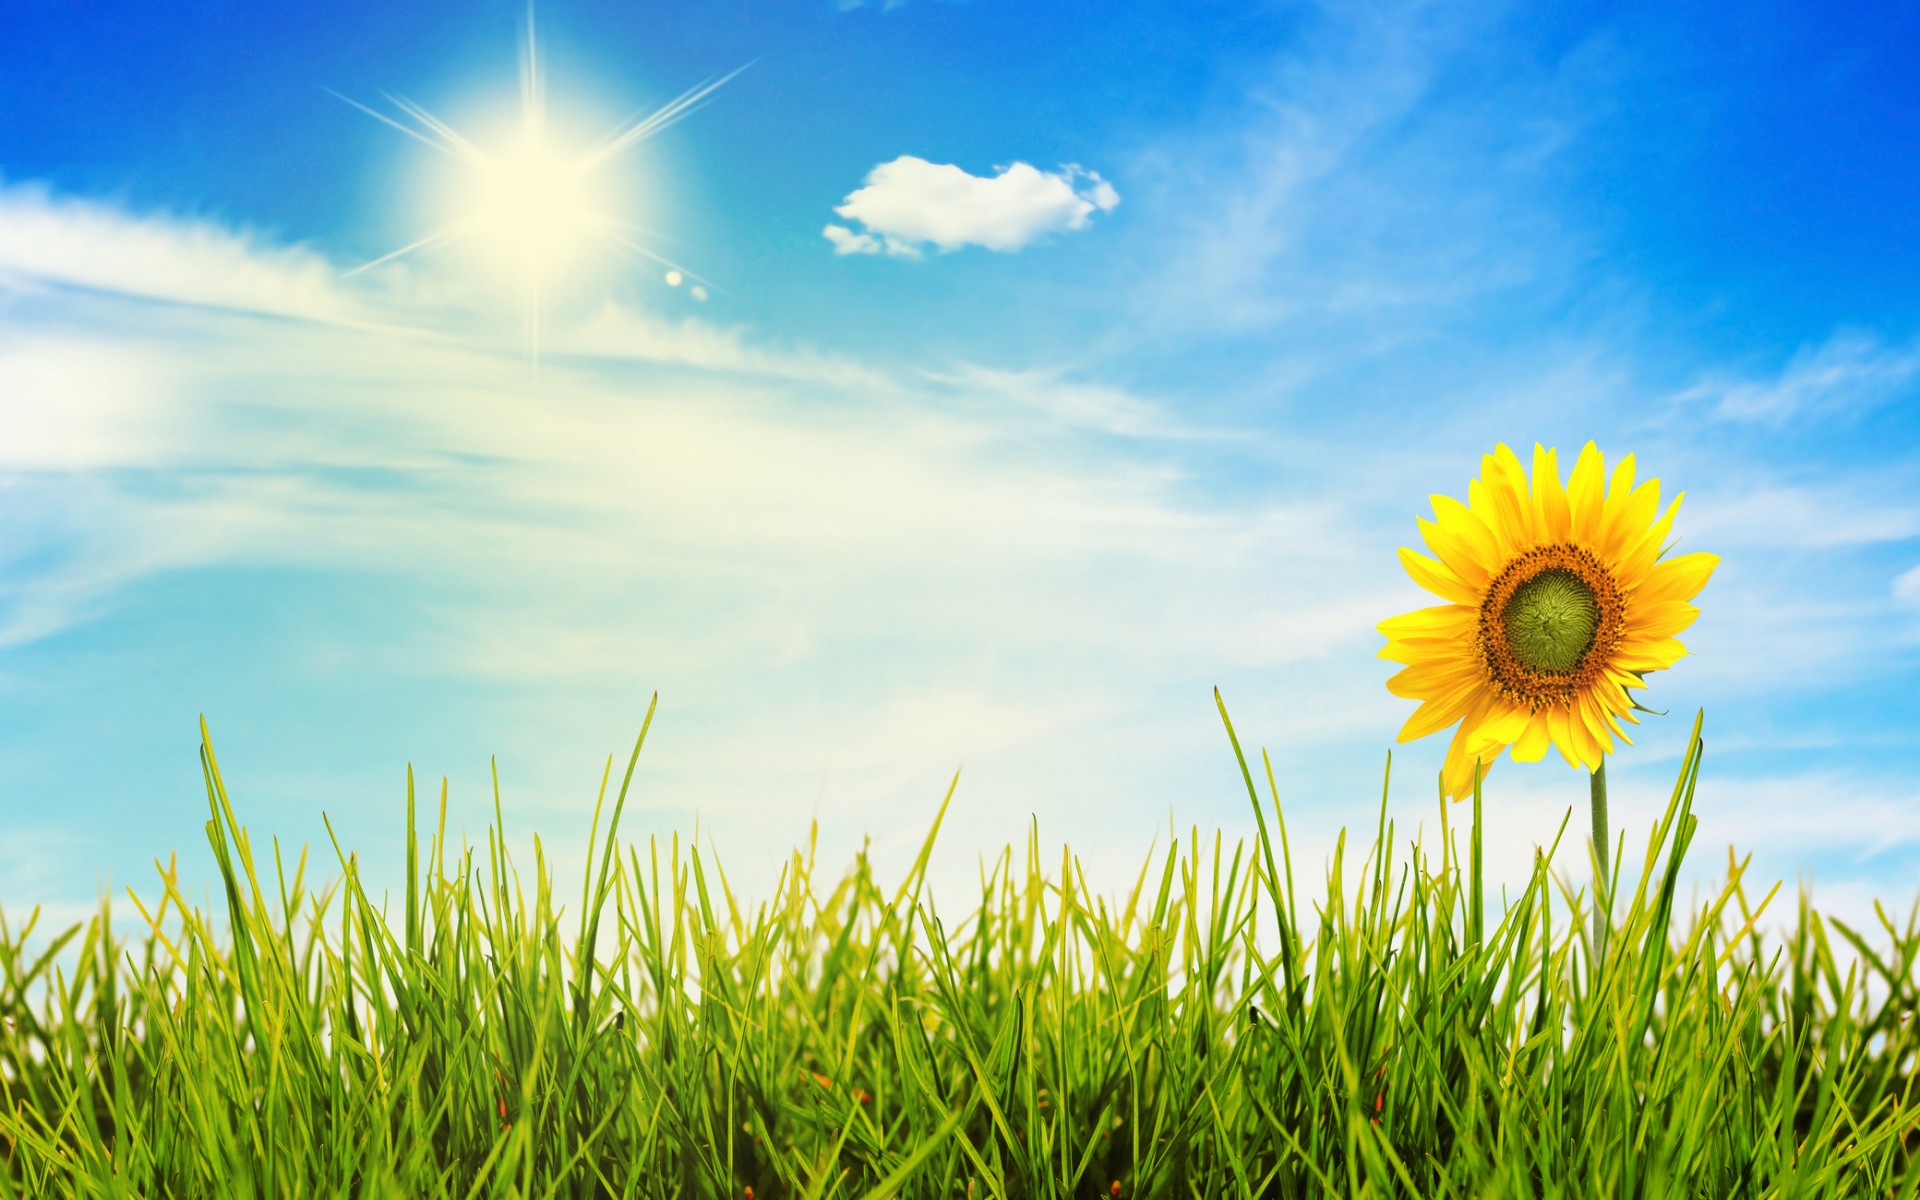 Free Sunny Day Wallpaper by Paul Senna on FL Nature HDQ 387.91 KB